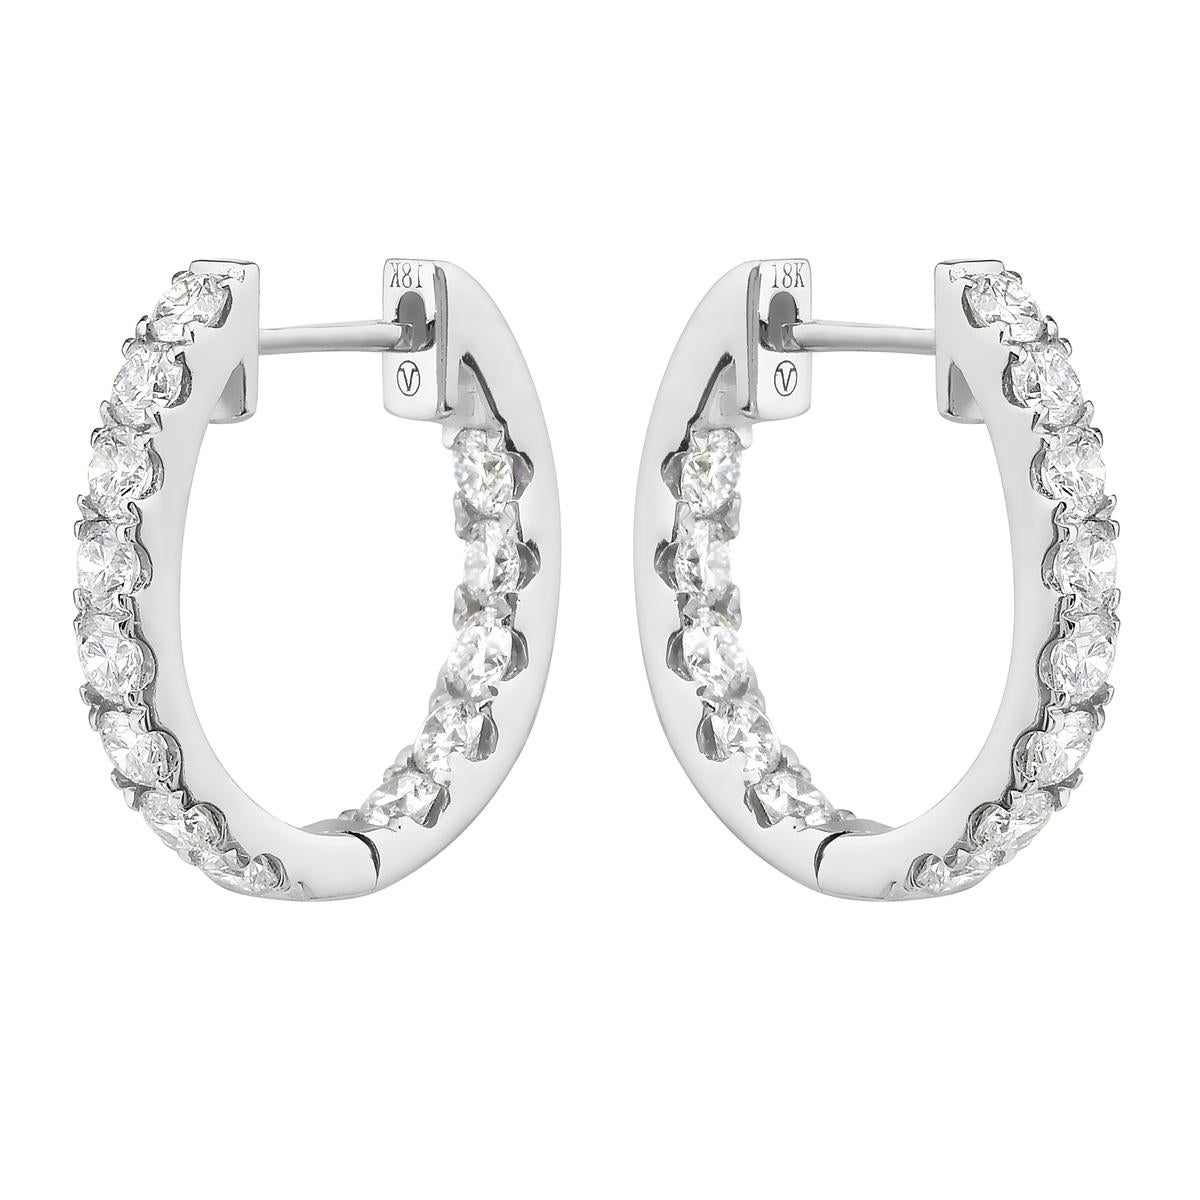 With these exquisite white gold inside and out hoop earrings, style and glamour are in the spotlight. These 18-karat earrings are made from 3.8 grams of gold. These earrings are adorned with VS2, G color diamonds, made out of 26 diamonds totaling